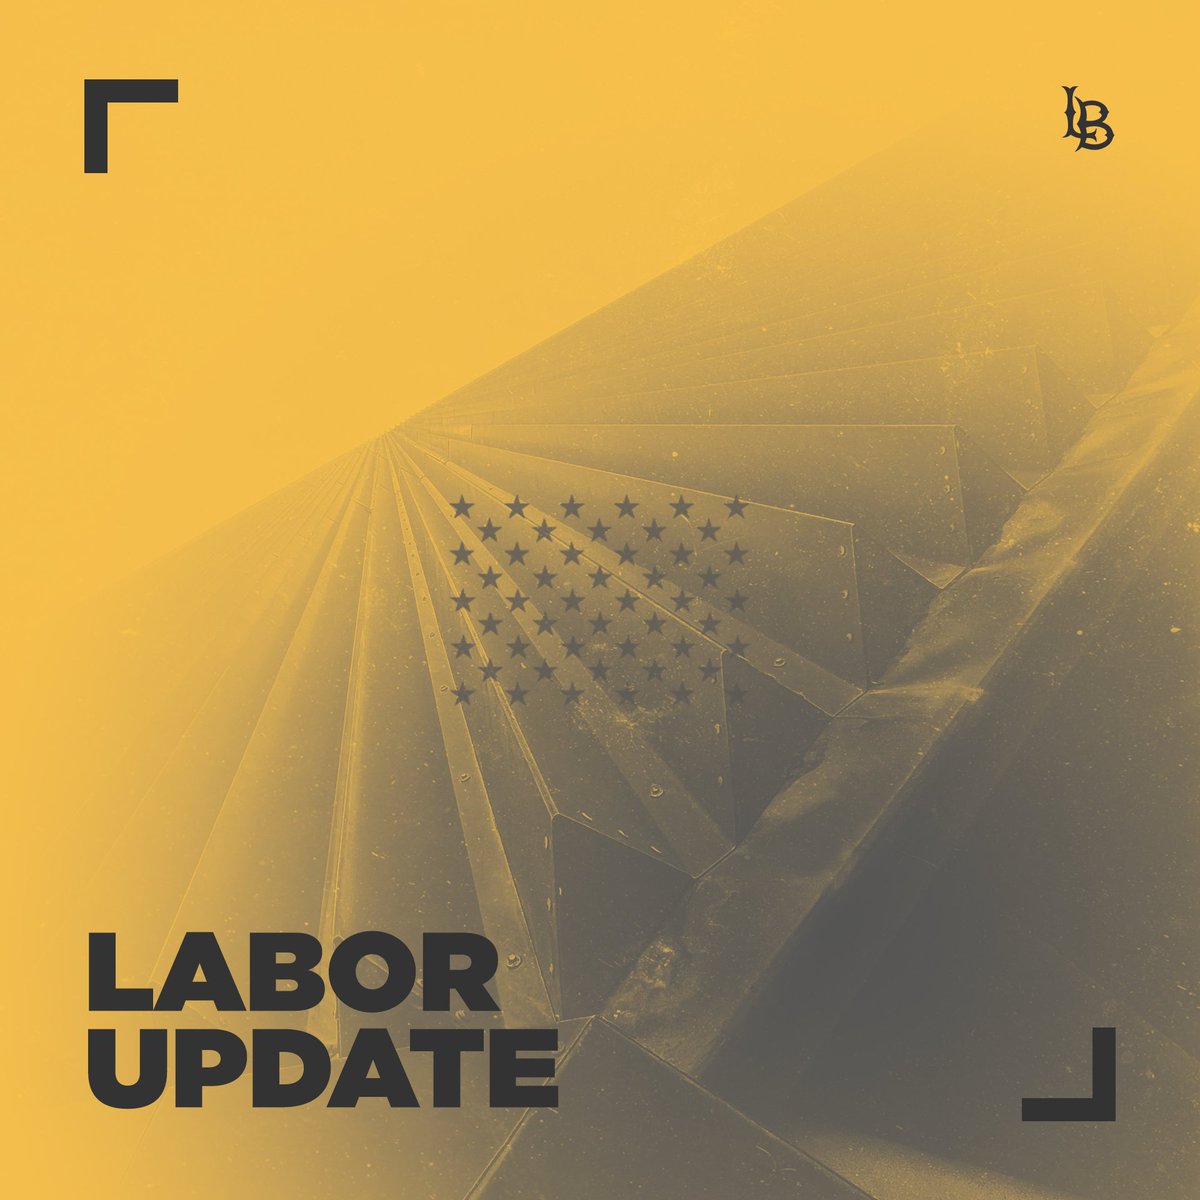 The CFA labor union strike has ended. Campus is open with classes being held. Learn more at csulb.edu/labor-update.